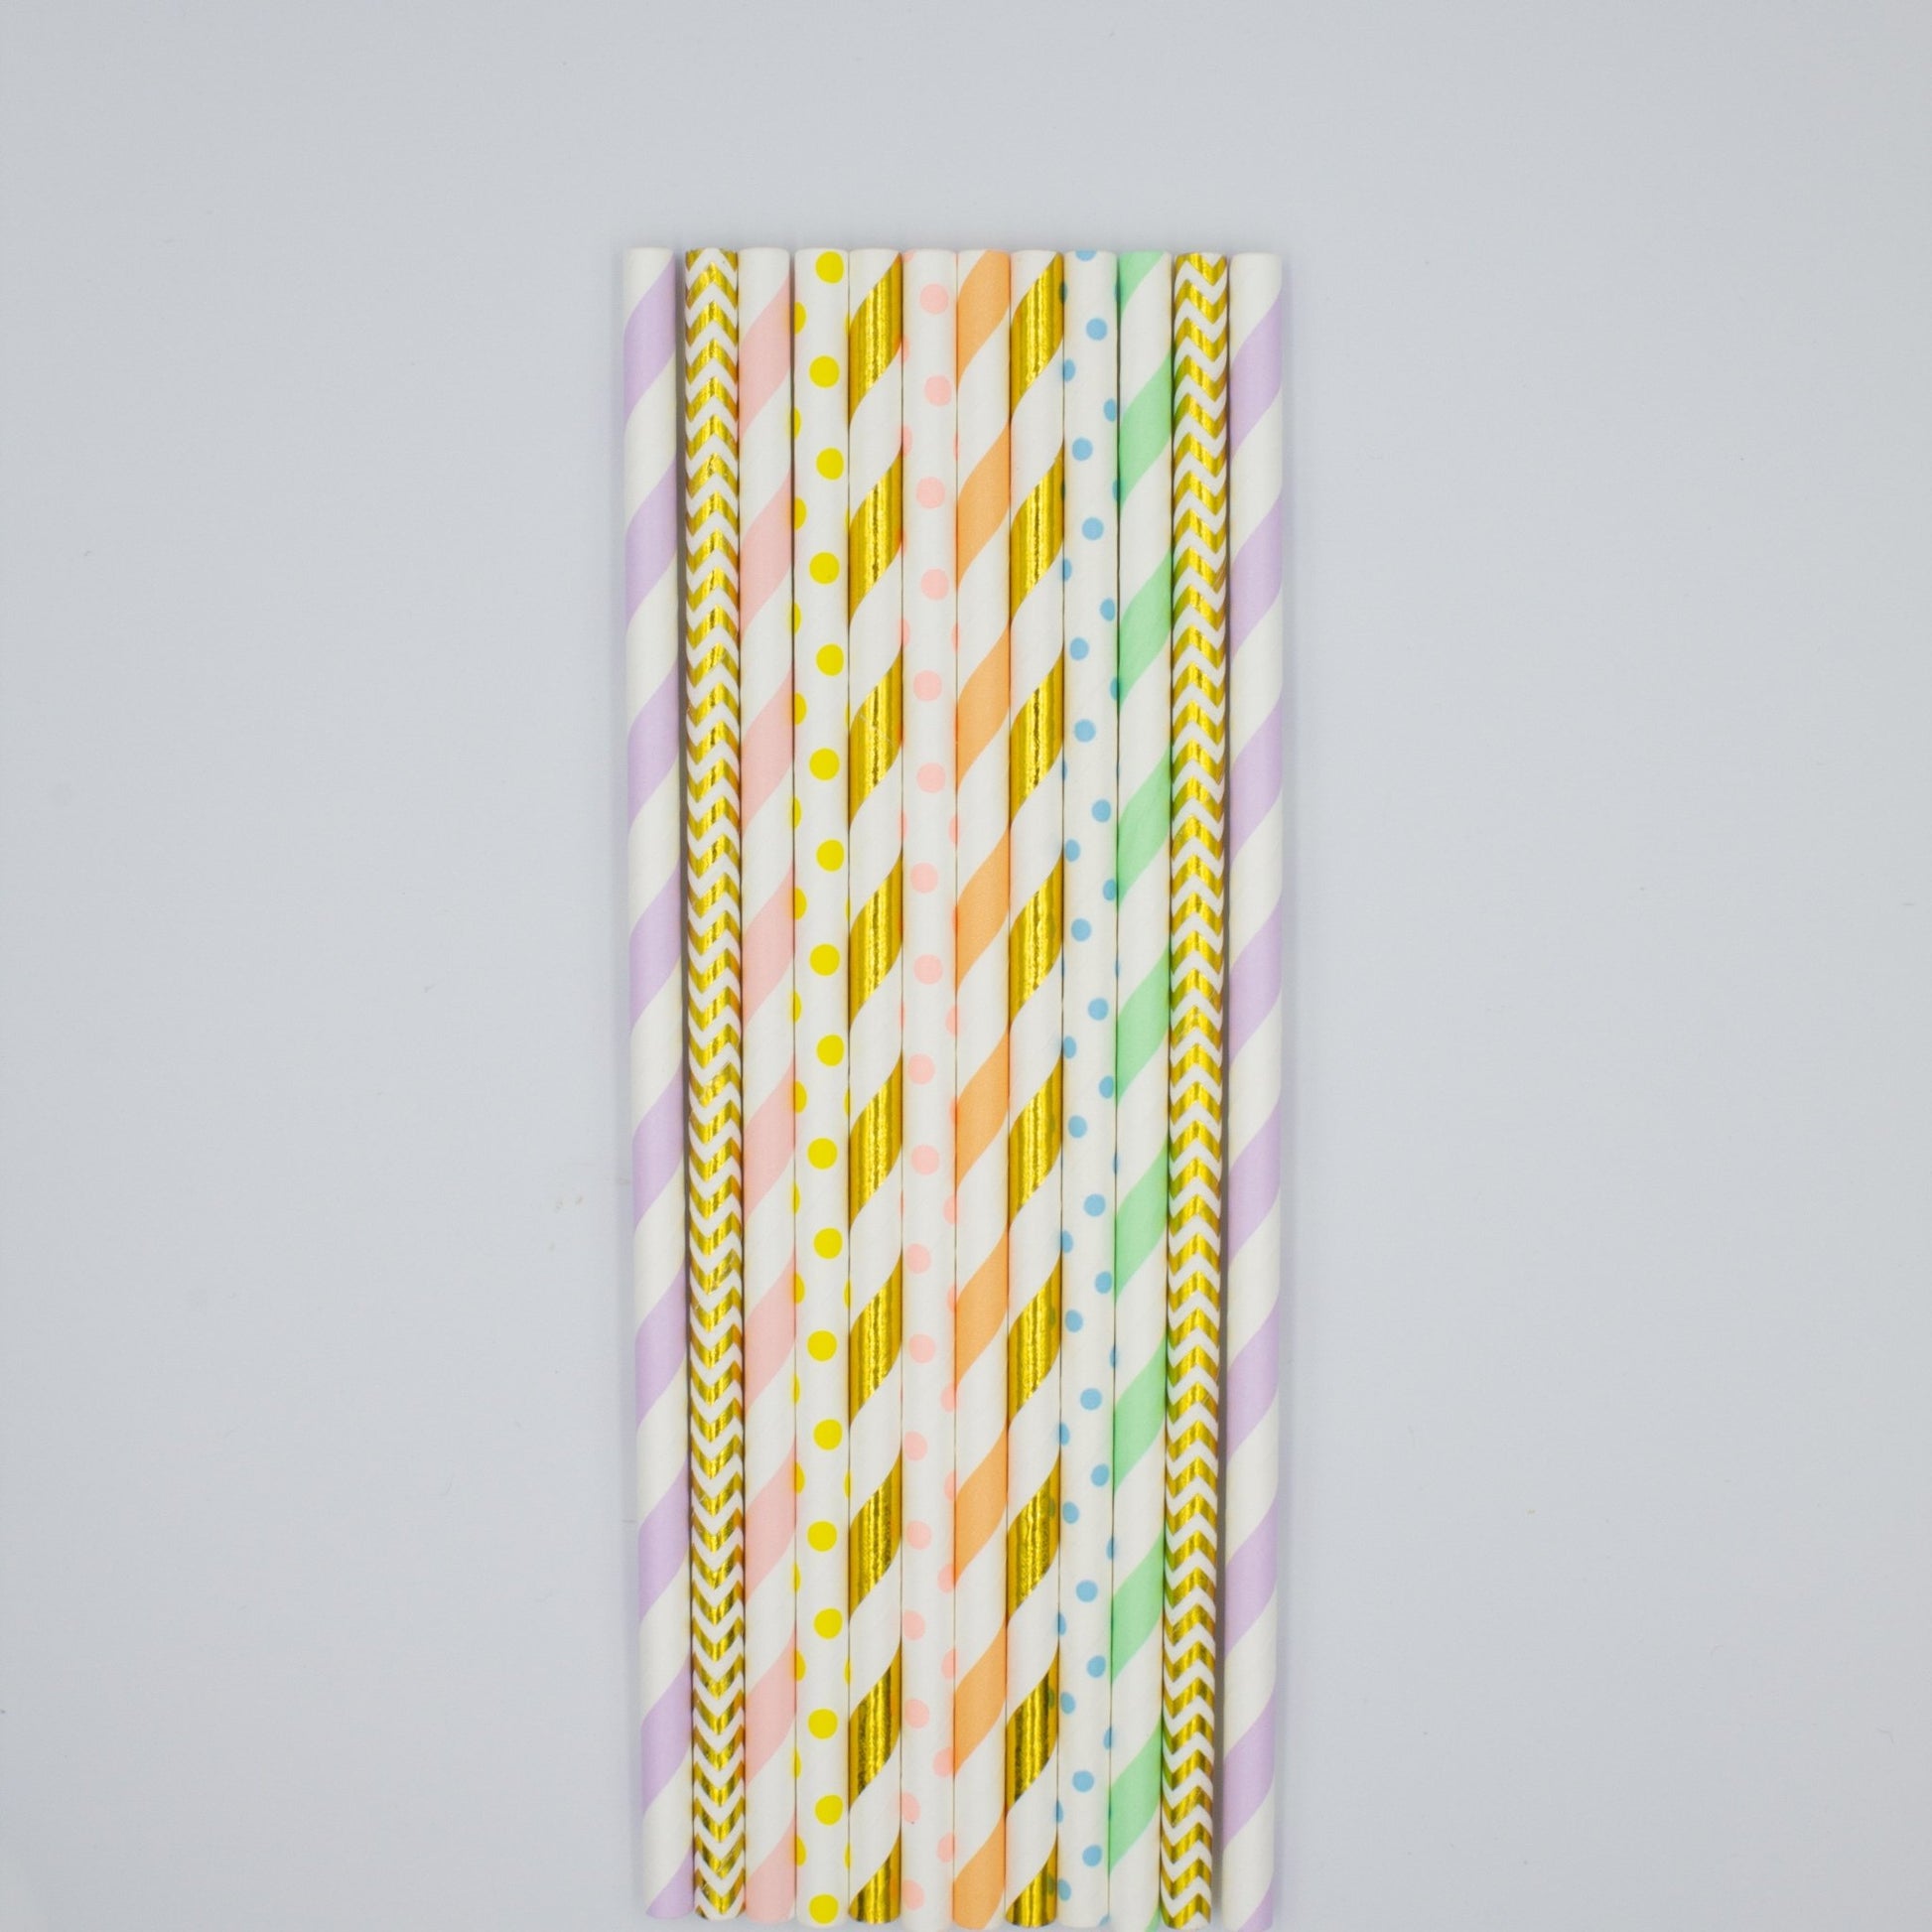 Pastel Rainbow Paper Straws in Pink, Orange, Yellow, Green, Blue, Purple, Gold (Set of 12) - Ellie's Party Supply